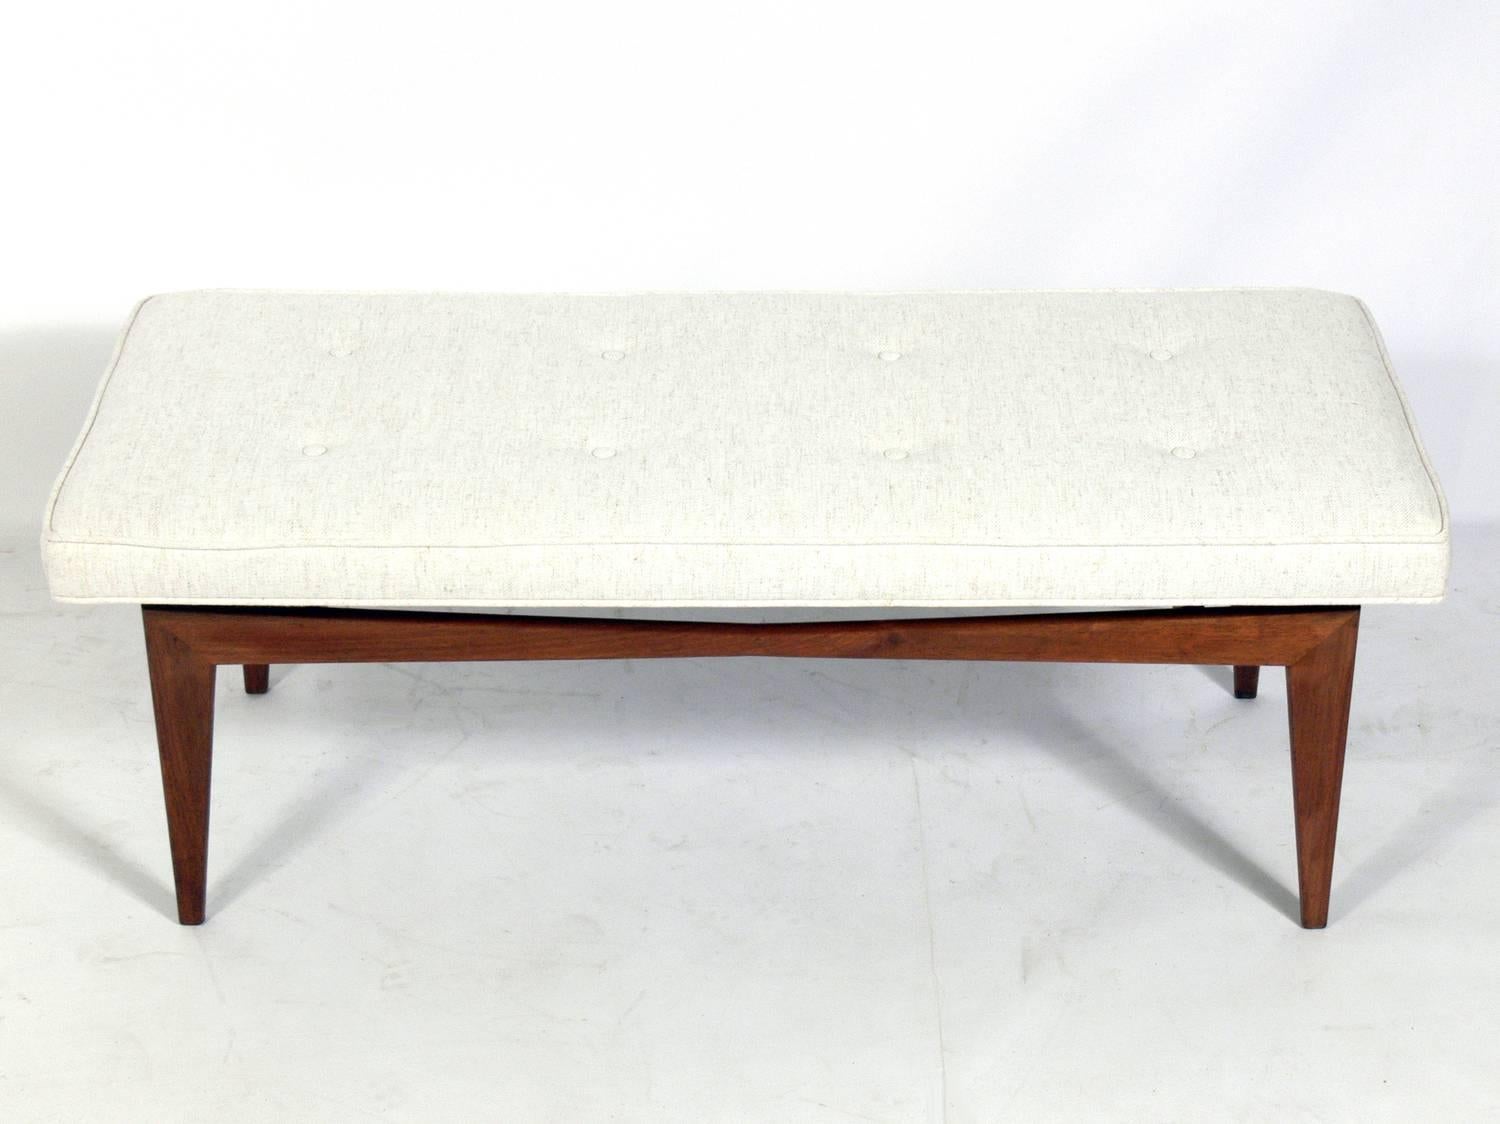 Clean lined midcentury walnut bench, in the manner of Jens Risom, American, circa 1950s. The simple architectural design appears to float the seat over the base. It is a versatile size and would be perfect at the end of the bed, or as occasional